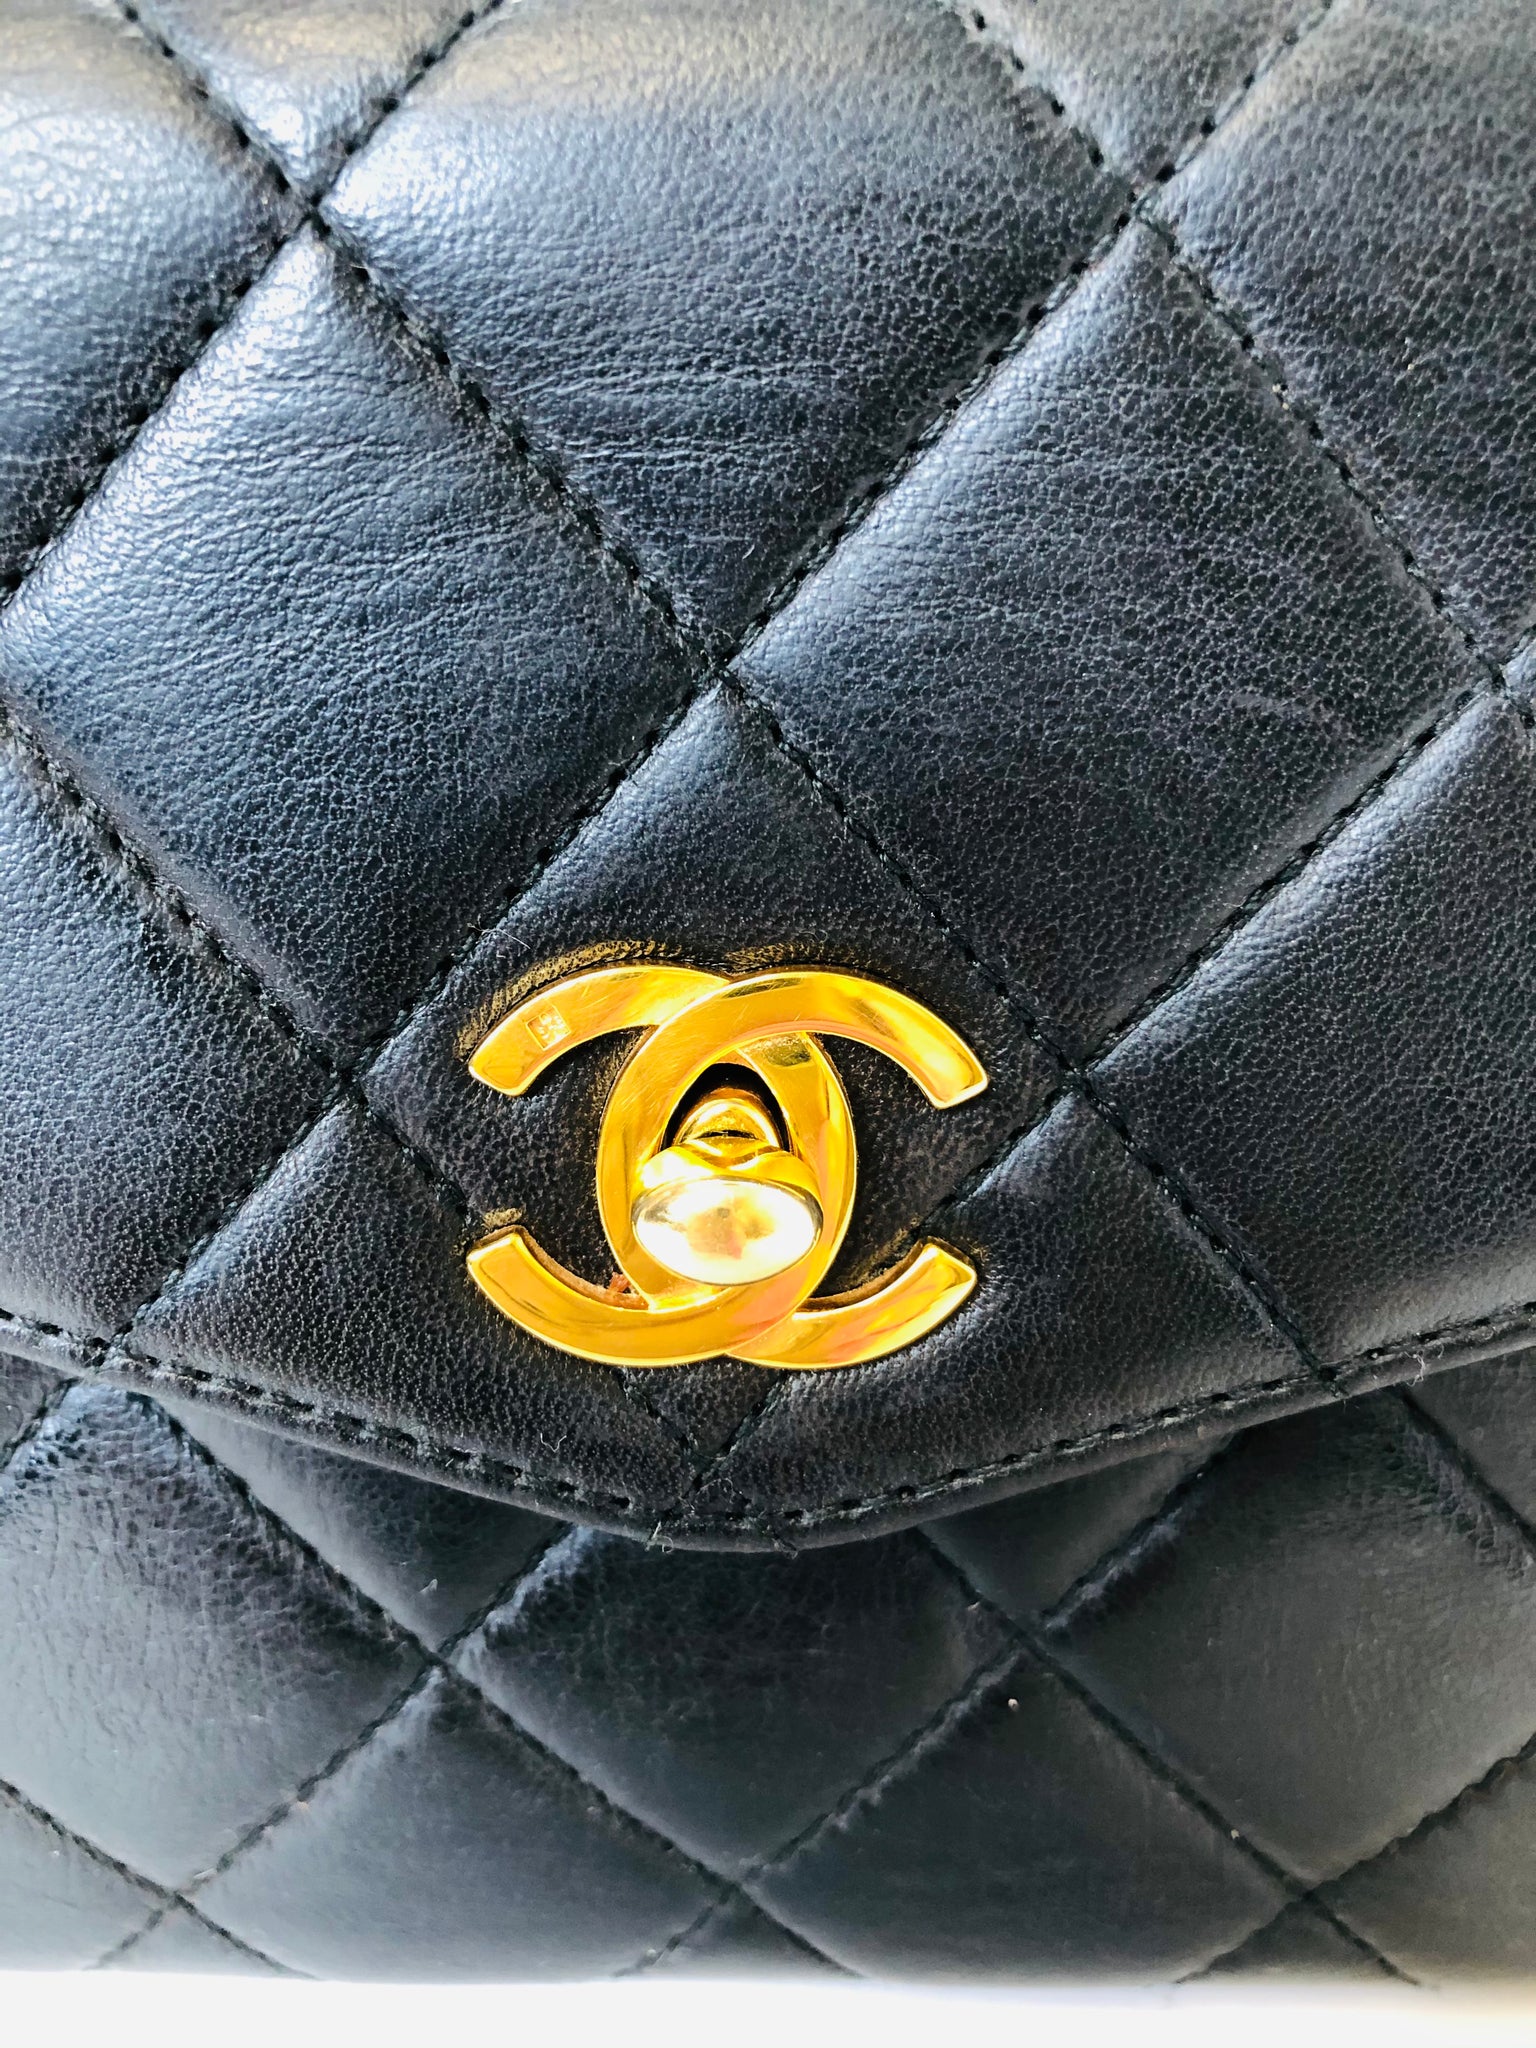 chanel bags black quilted